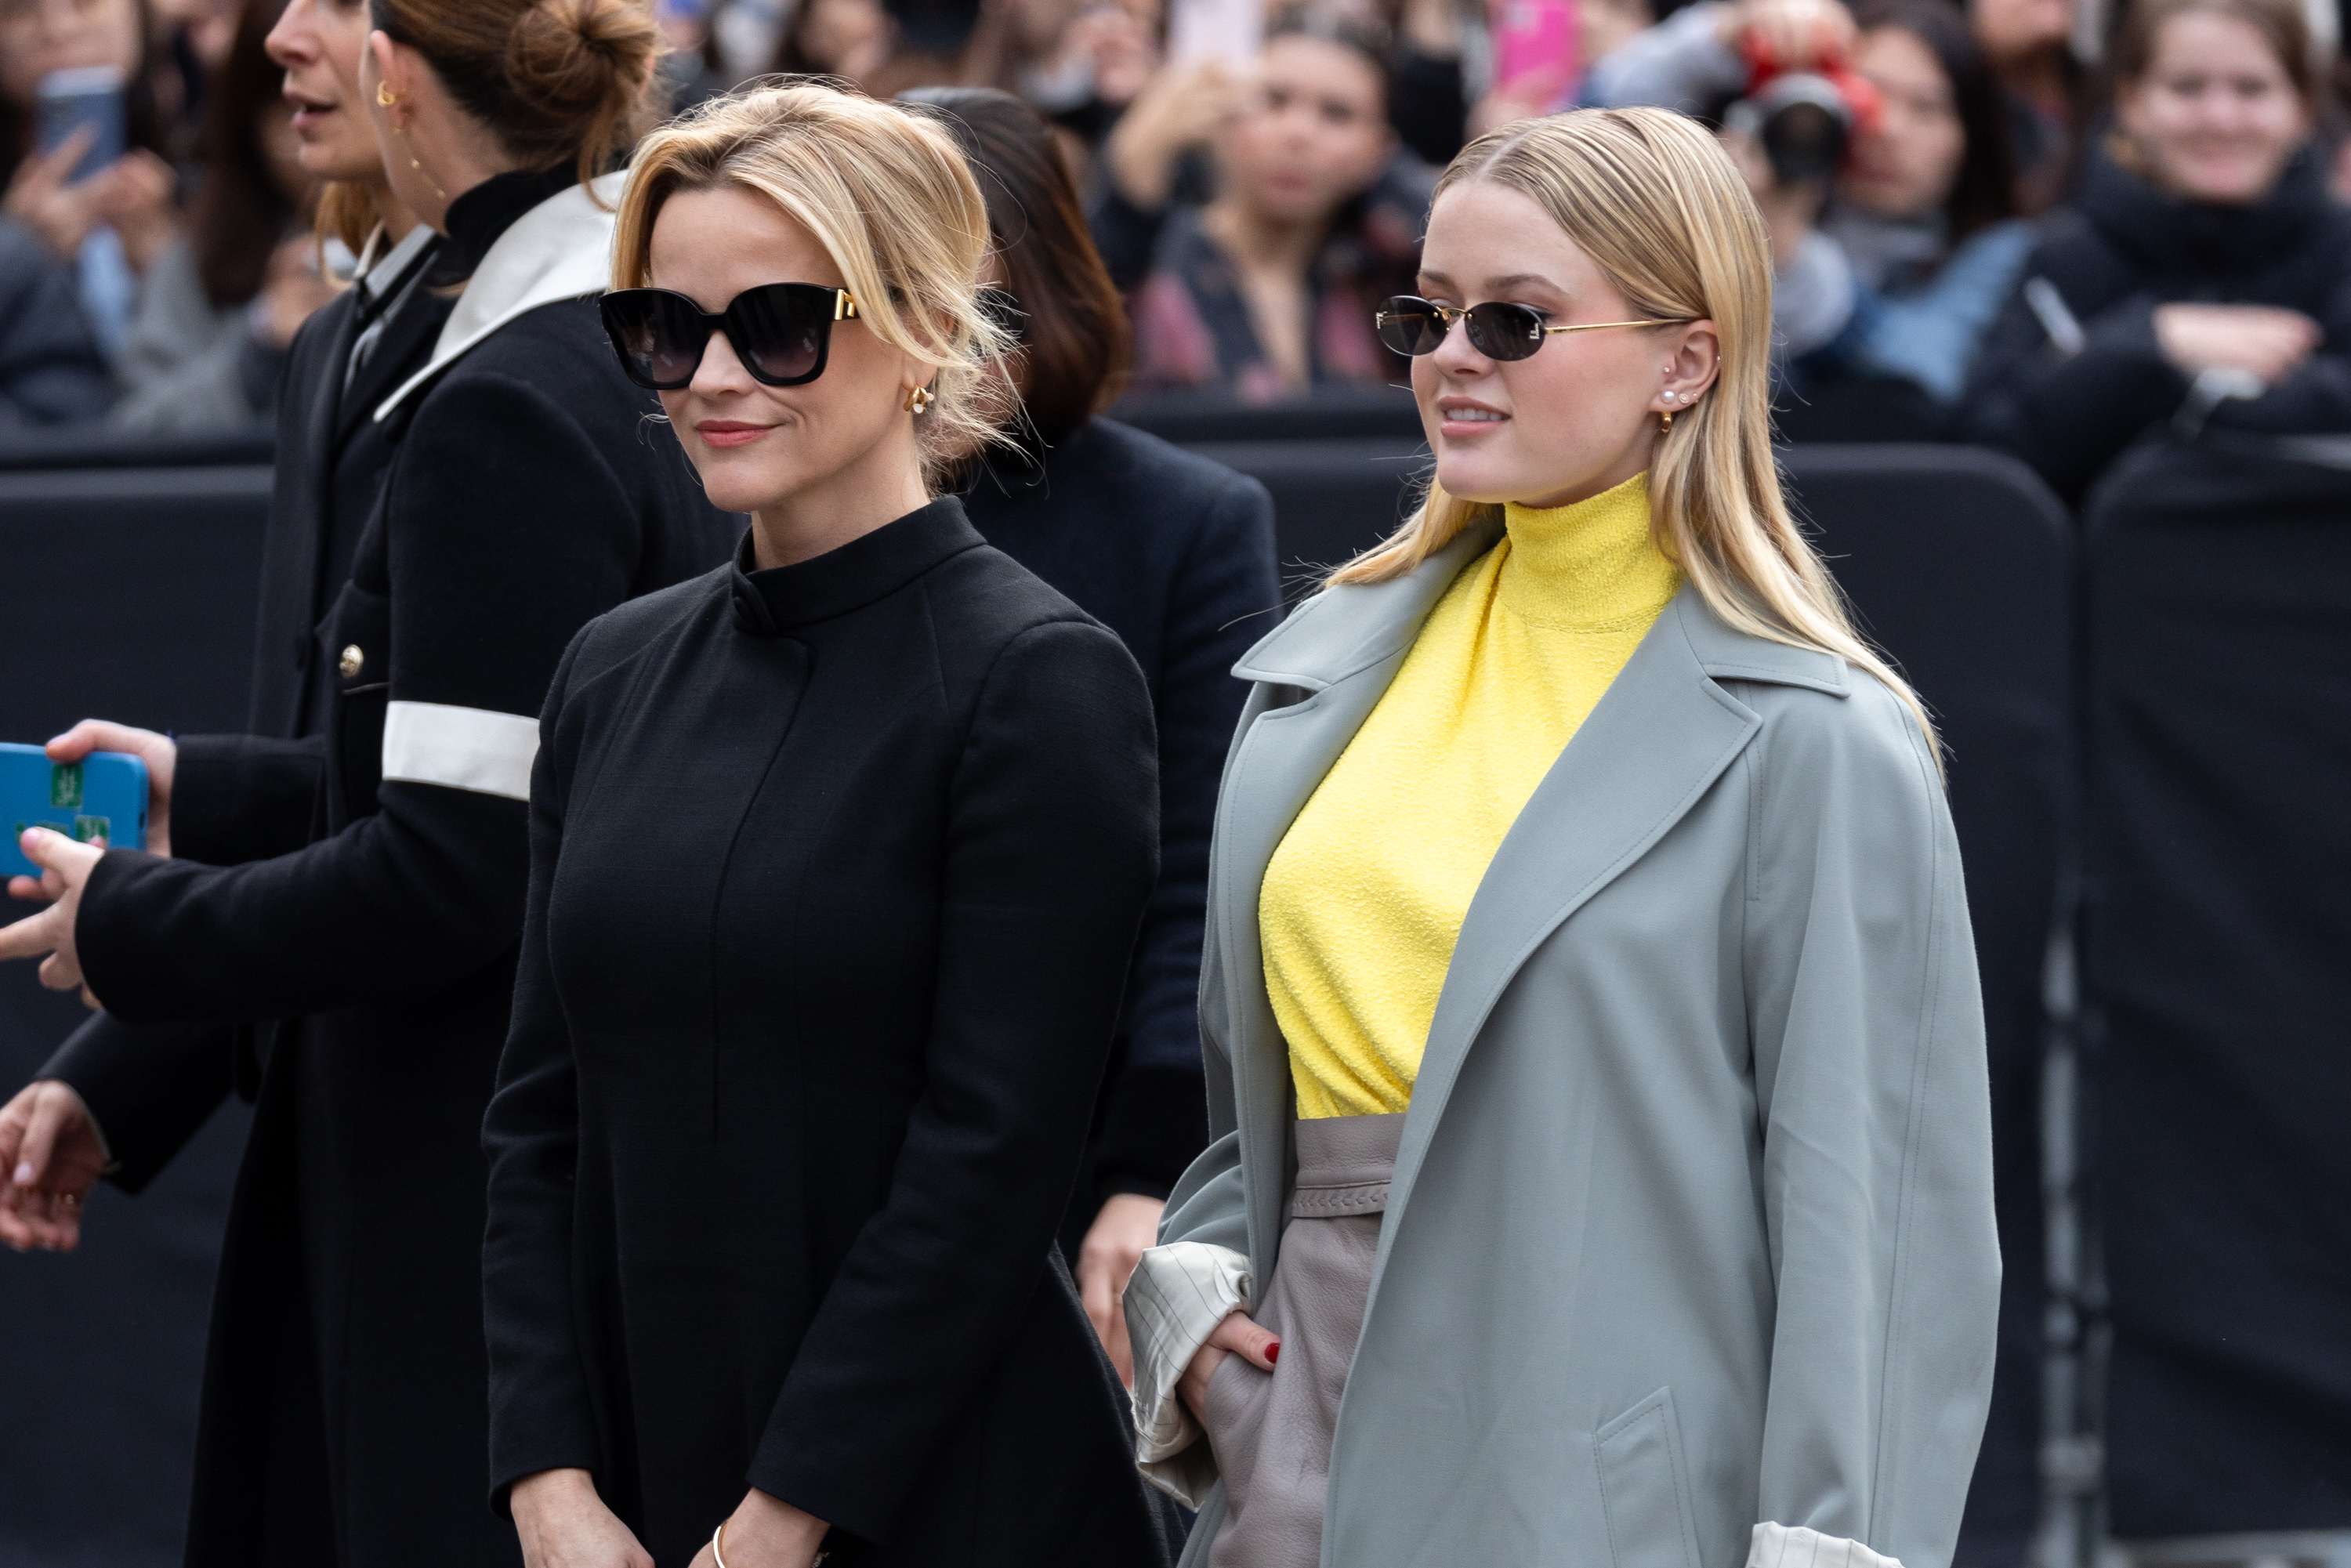 Reese in a black outfit with sunglasses and Ava in a gray coat over a yellow top